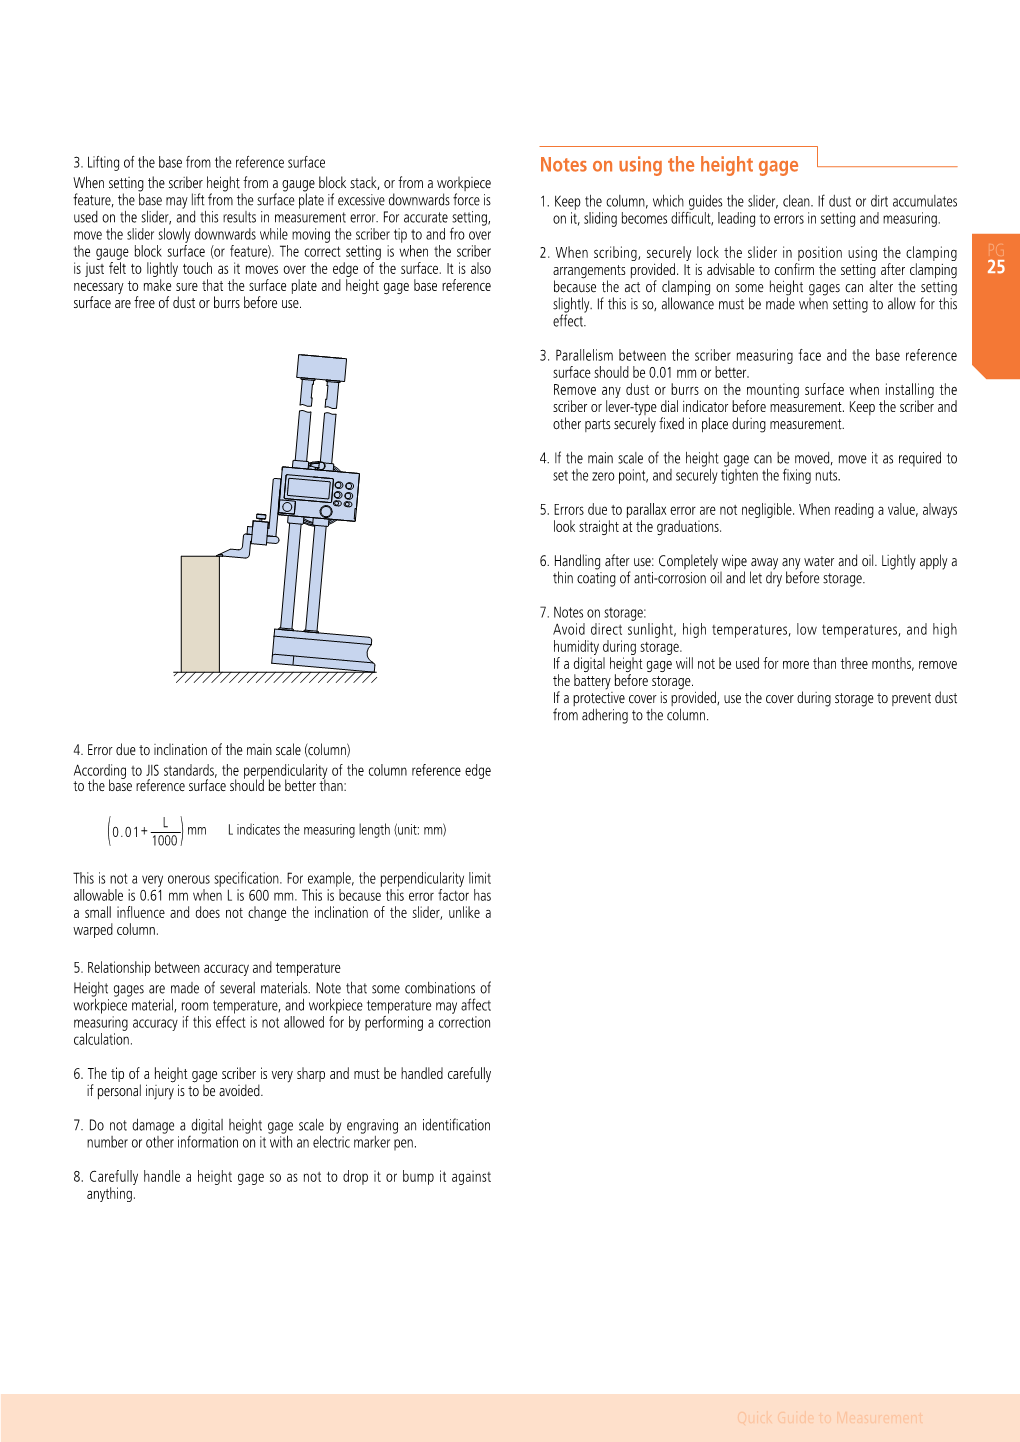 Notes on Using the Height Gage